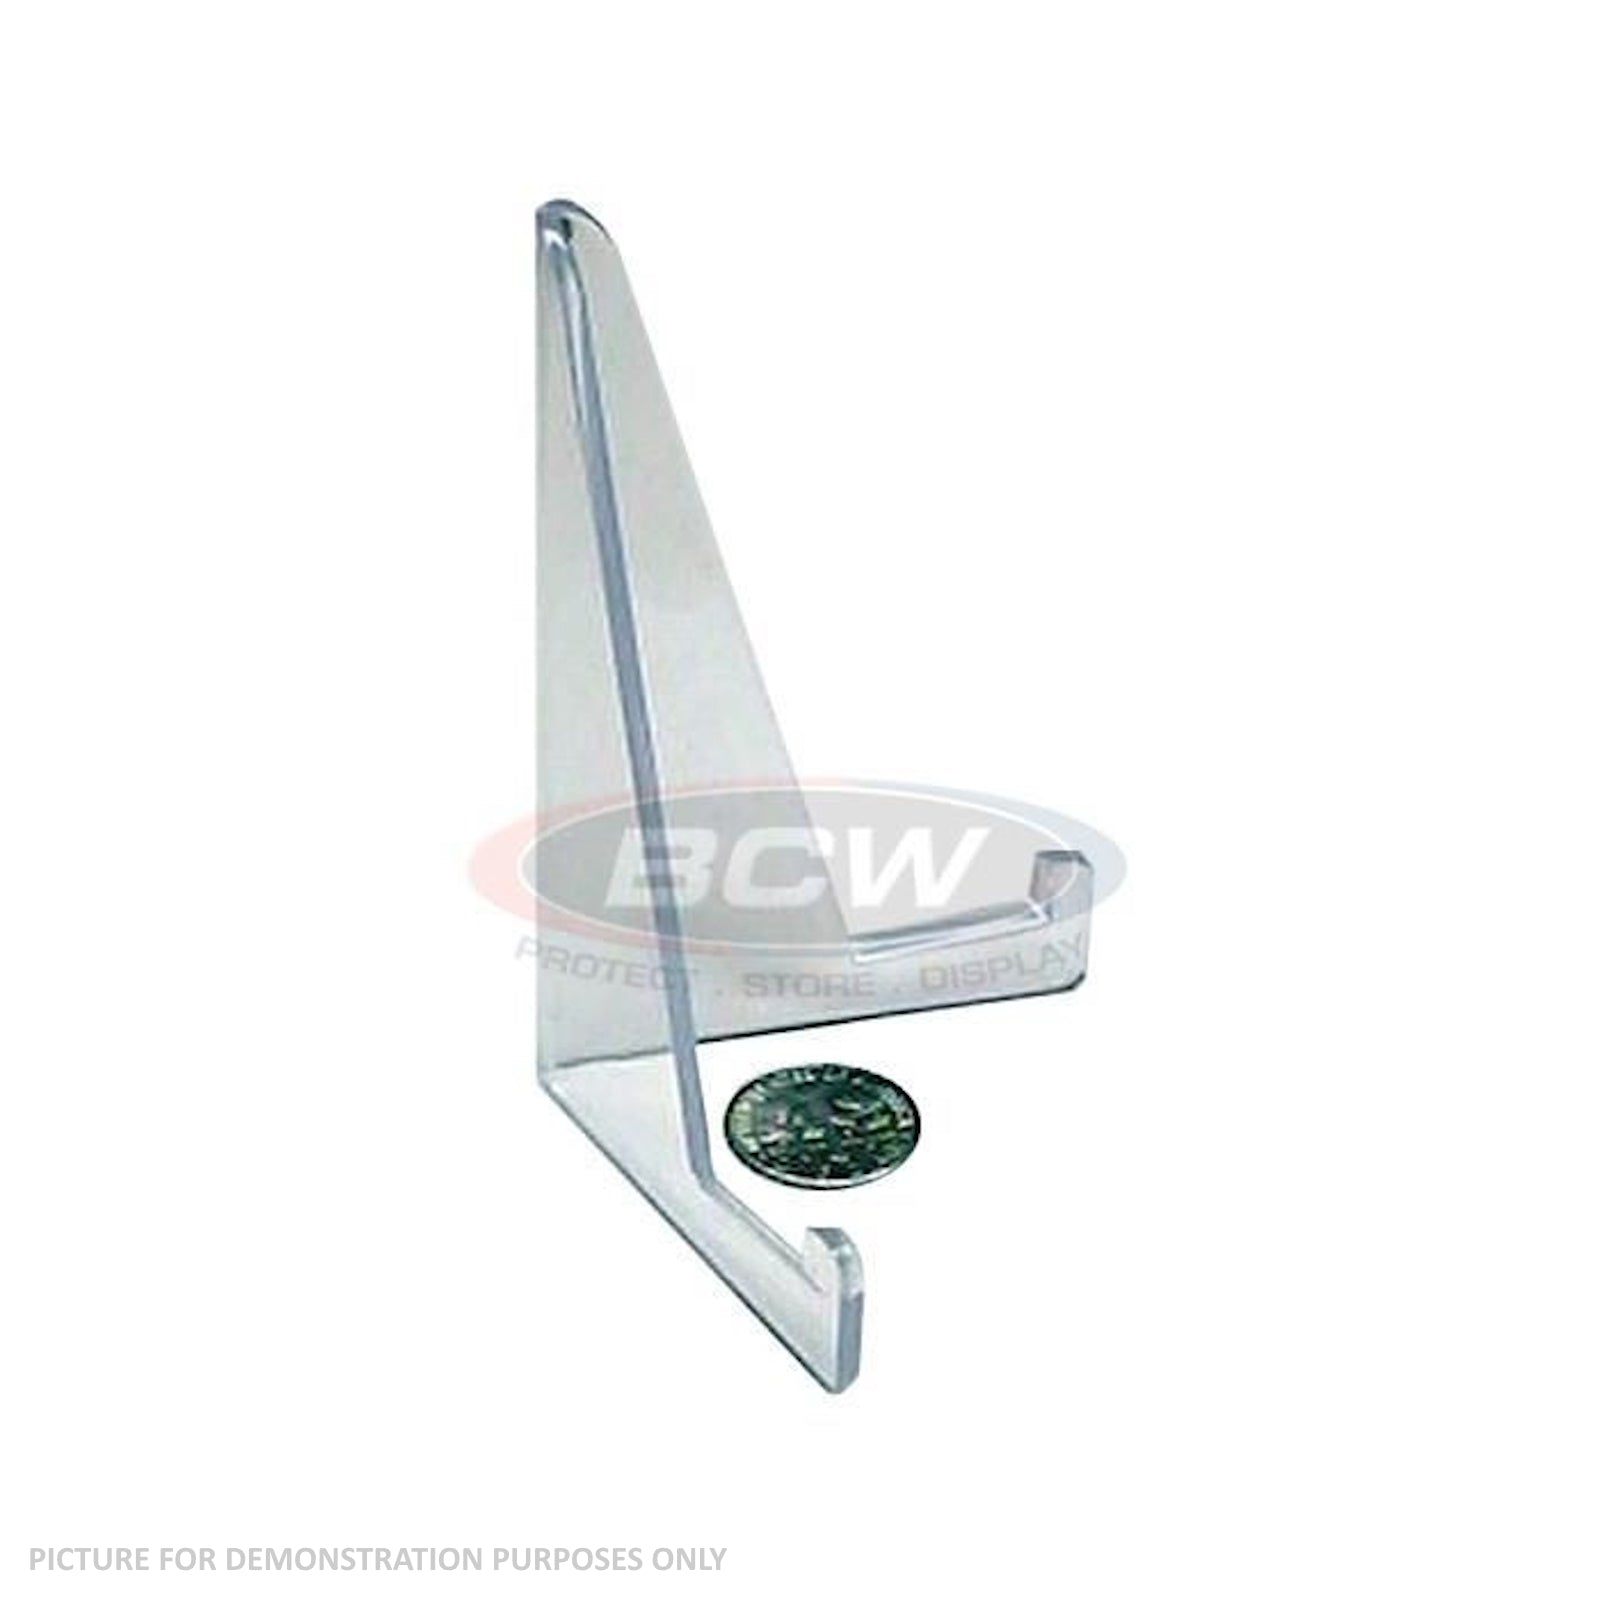 BCW Small Display Stand